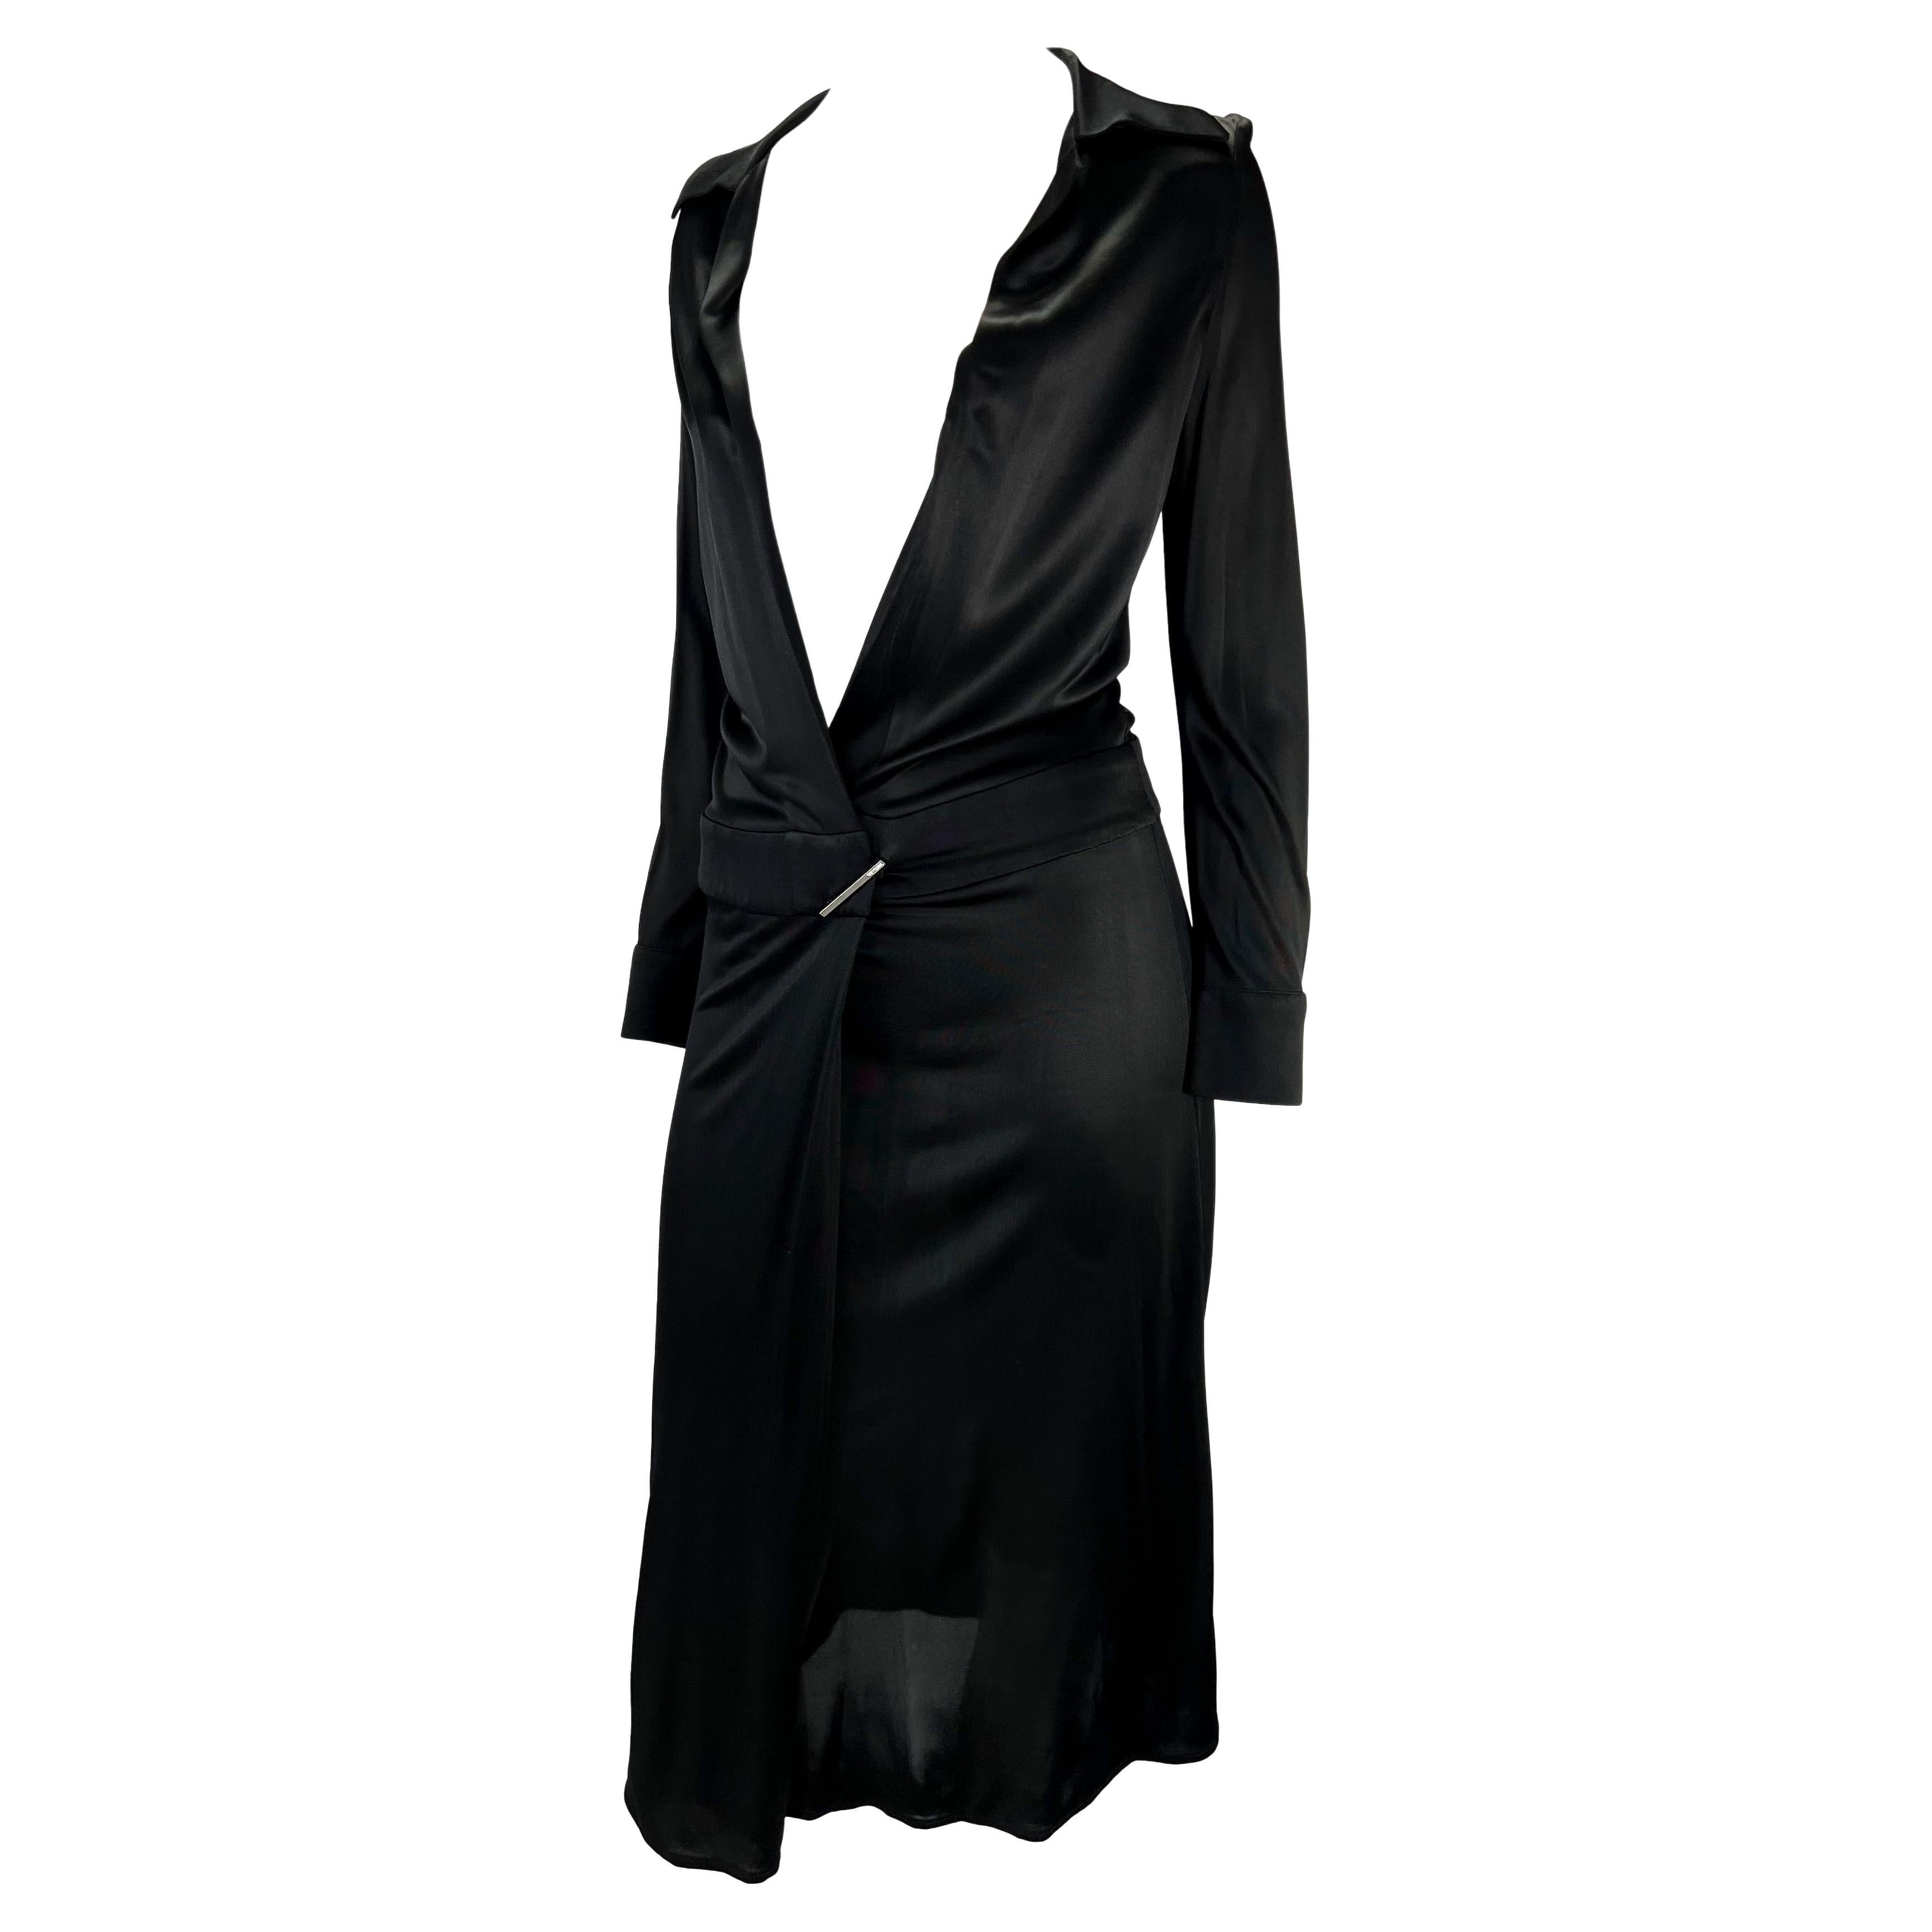 S/S 2000 Gucci by Tom Ford Runway Plunging Neckline Black Viscose Runway Dress In Good Condition In West Hollywood, CA